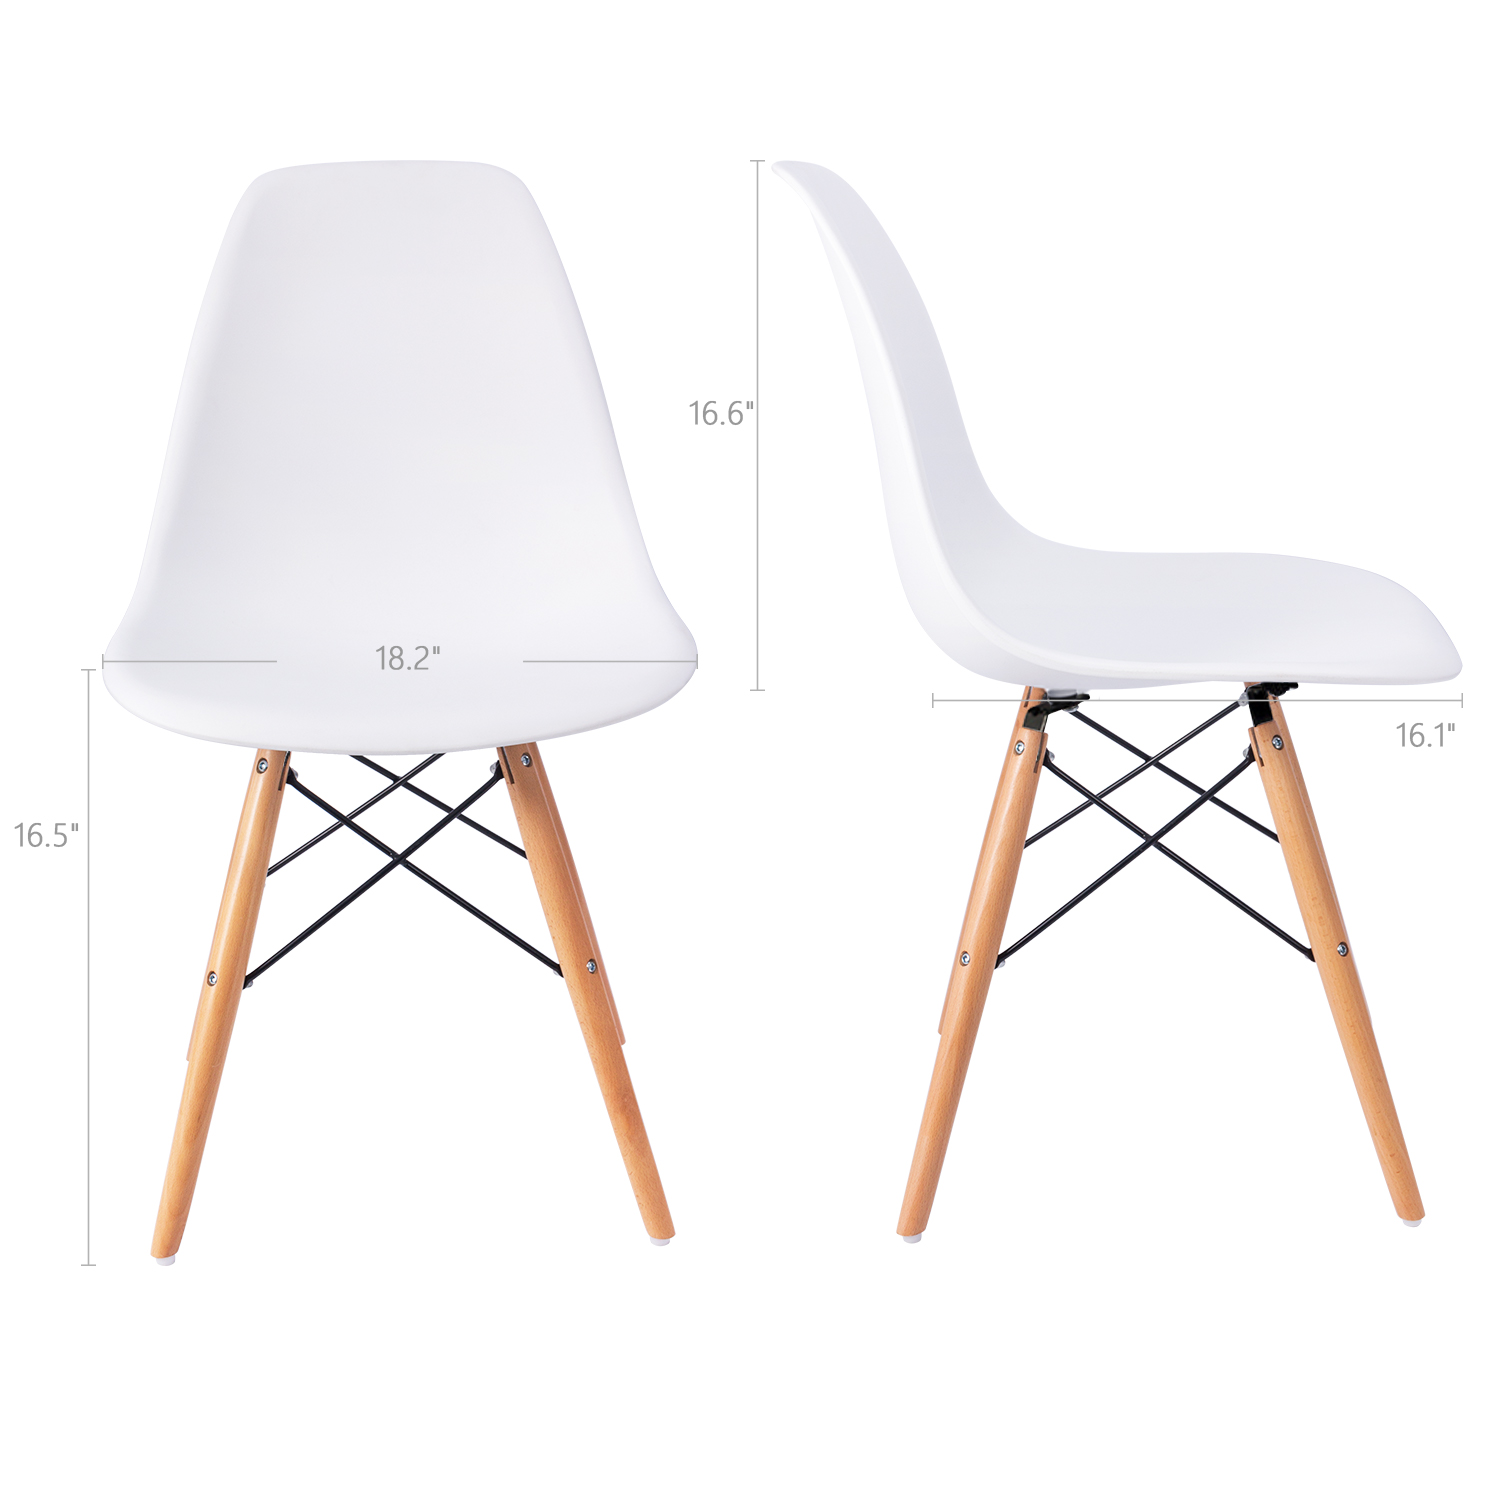 Lacoo Pre-Assembled Mid Century Modern Dining Chairs, Set of 4, Multiple Colors - image 2 of 8